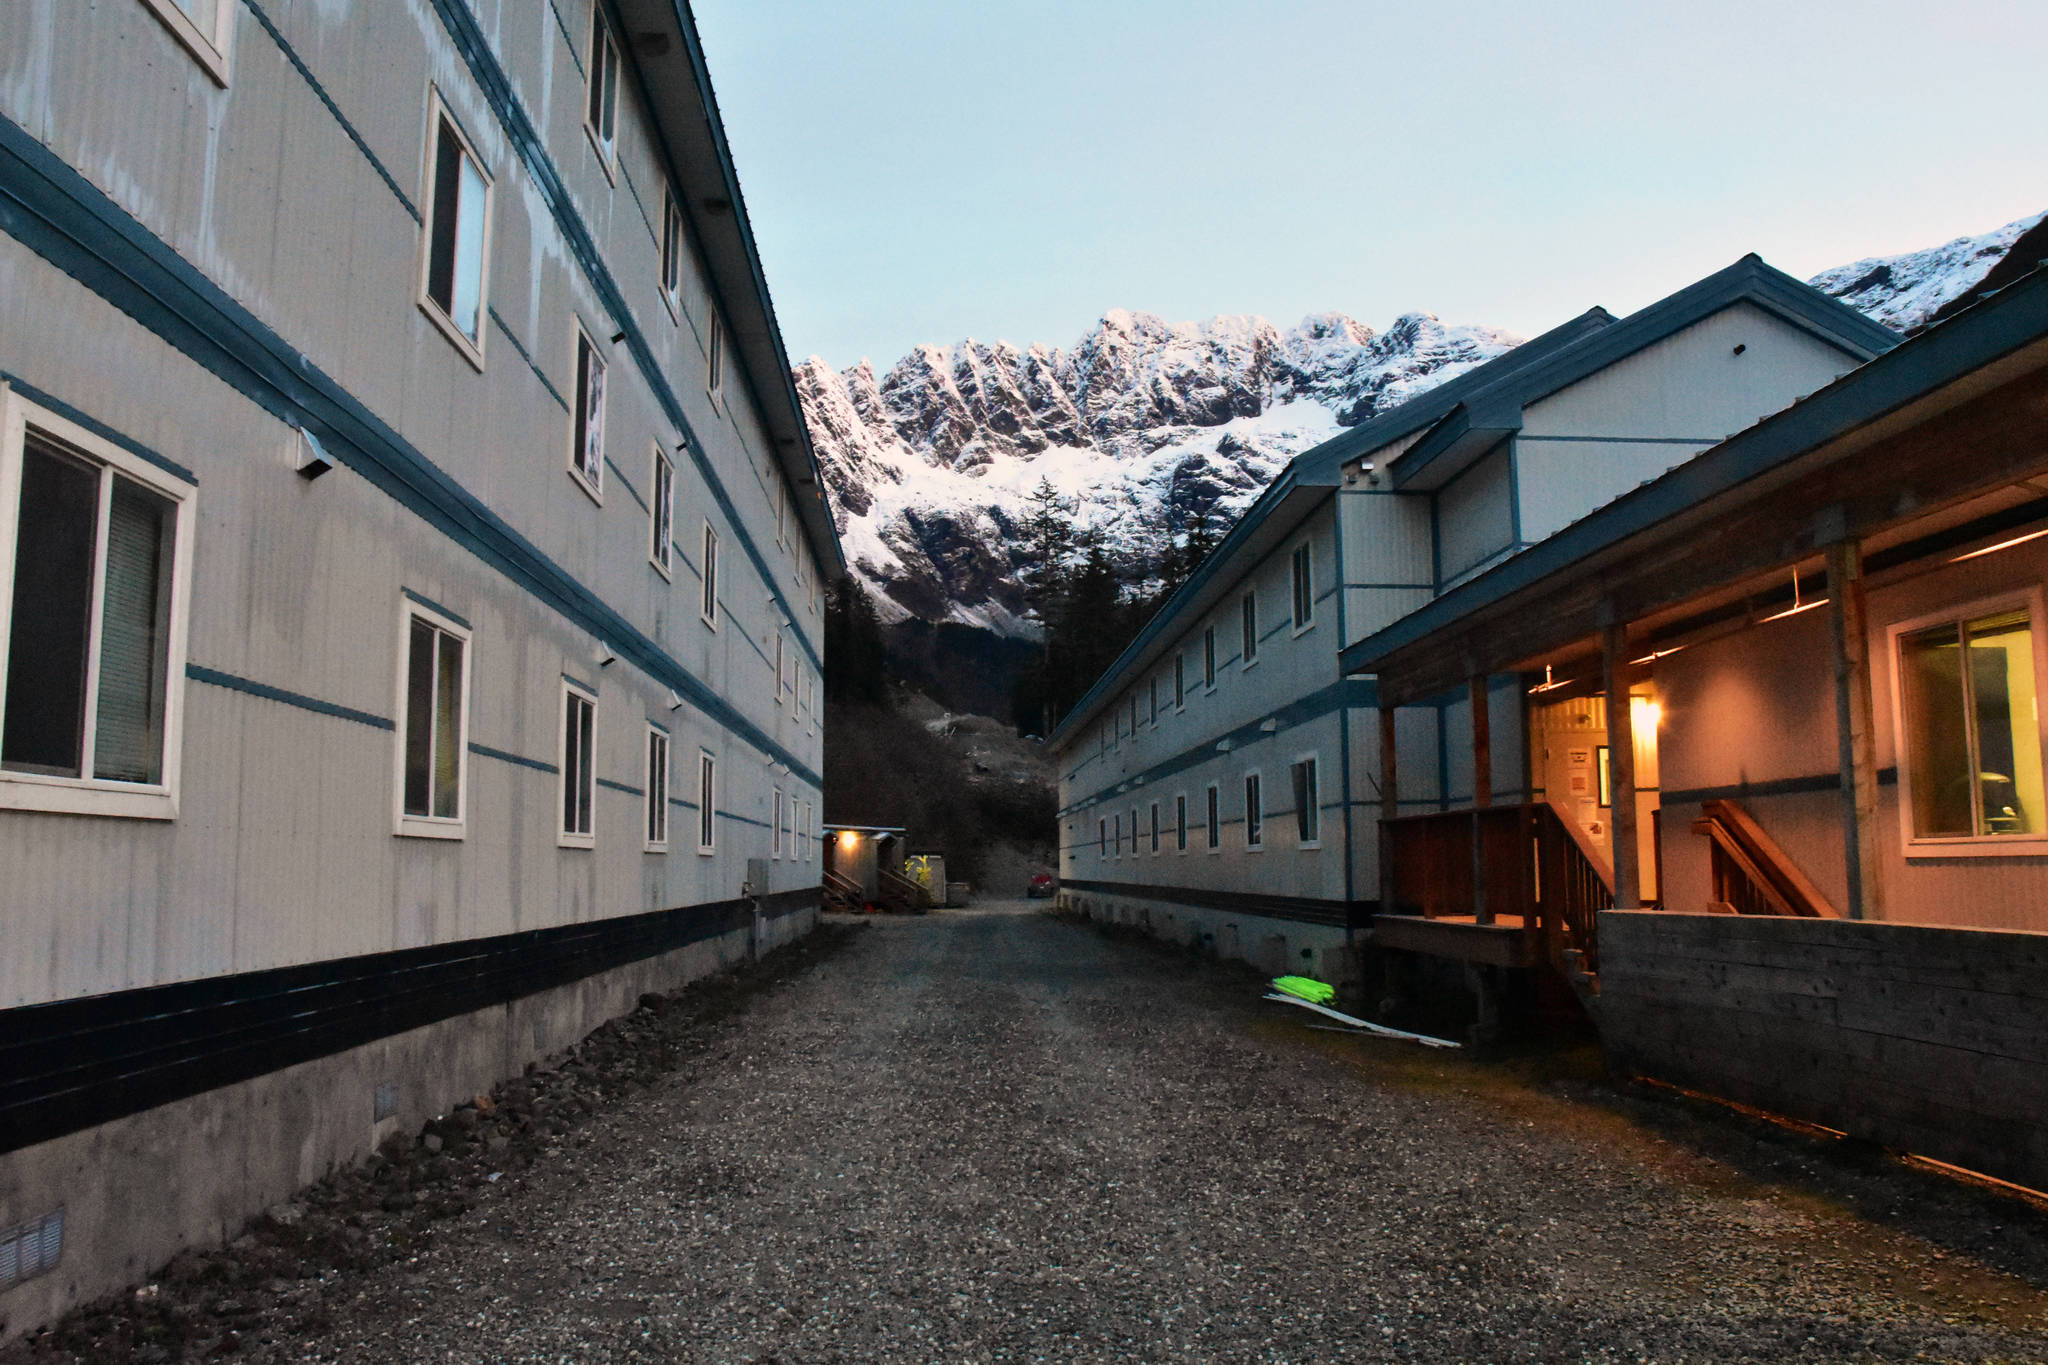 Dormitories at the Kensington Mine with Lions Head Mountain in the background on Monday, Oct. 14, 2019 (Peter Segall | Juneau Empire)